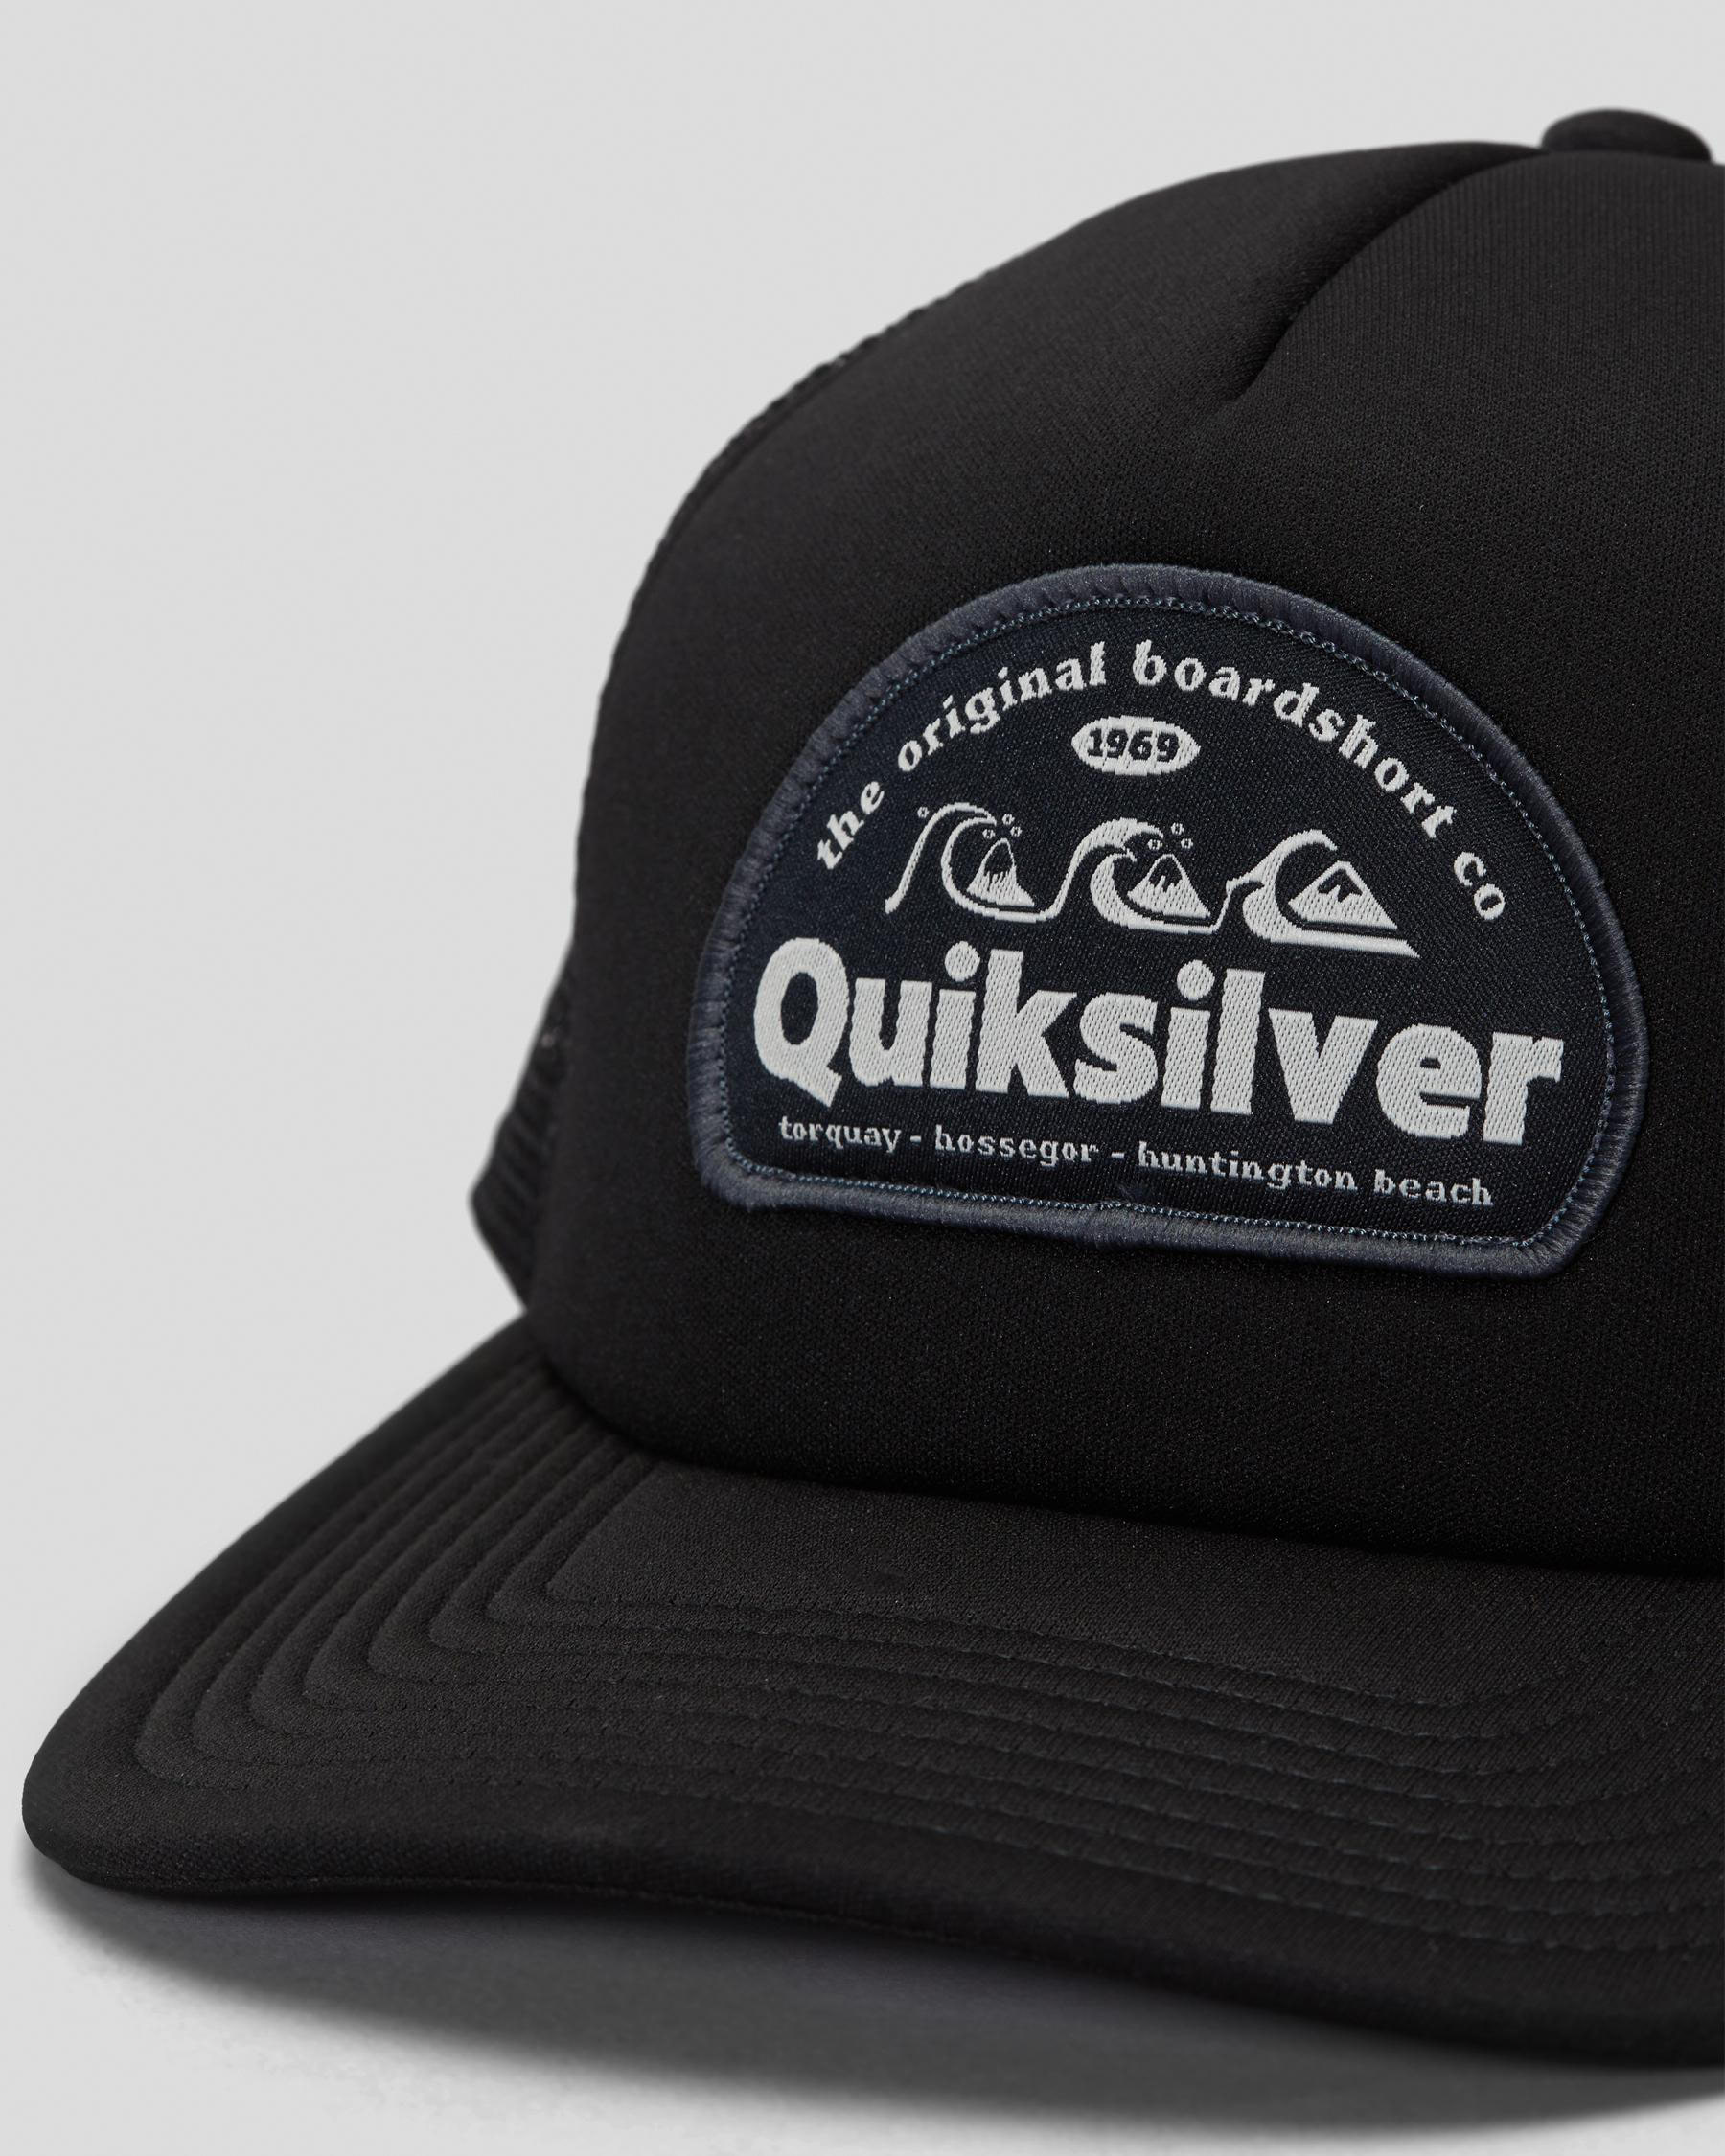 Quiksilver Onshore Youth Trucker Cap Returns In Black & United - Beach Shipping - Easy States City FREE